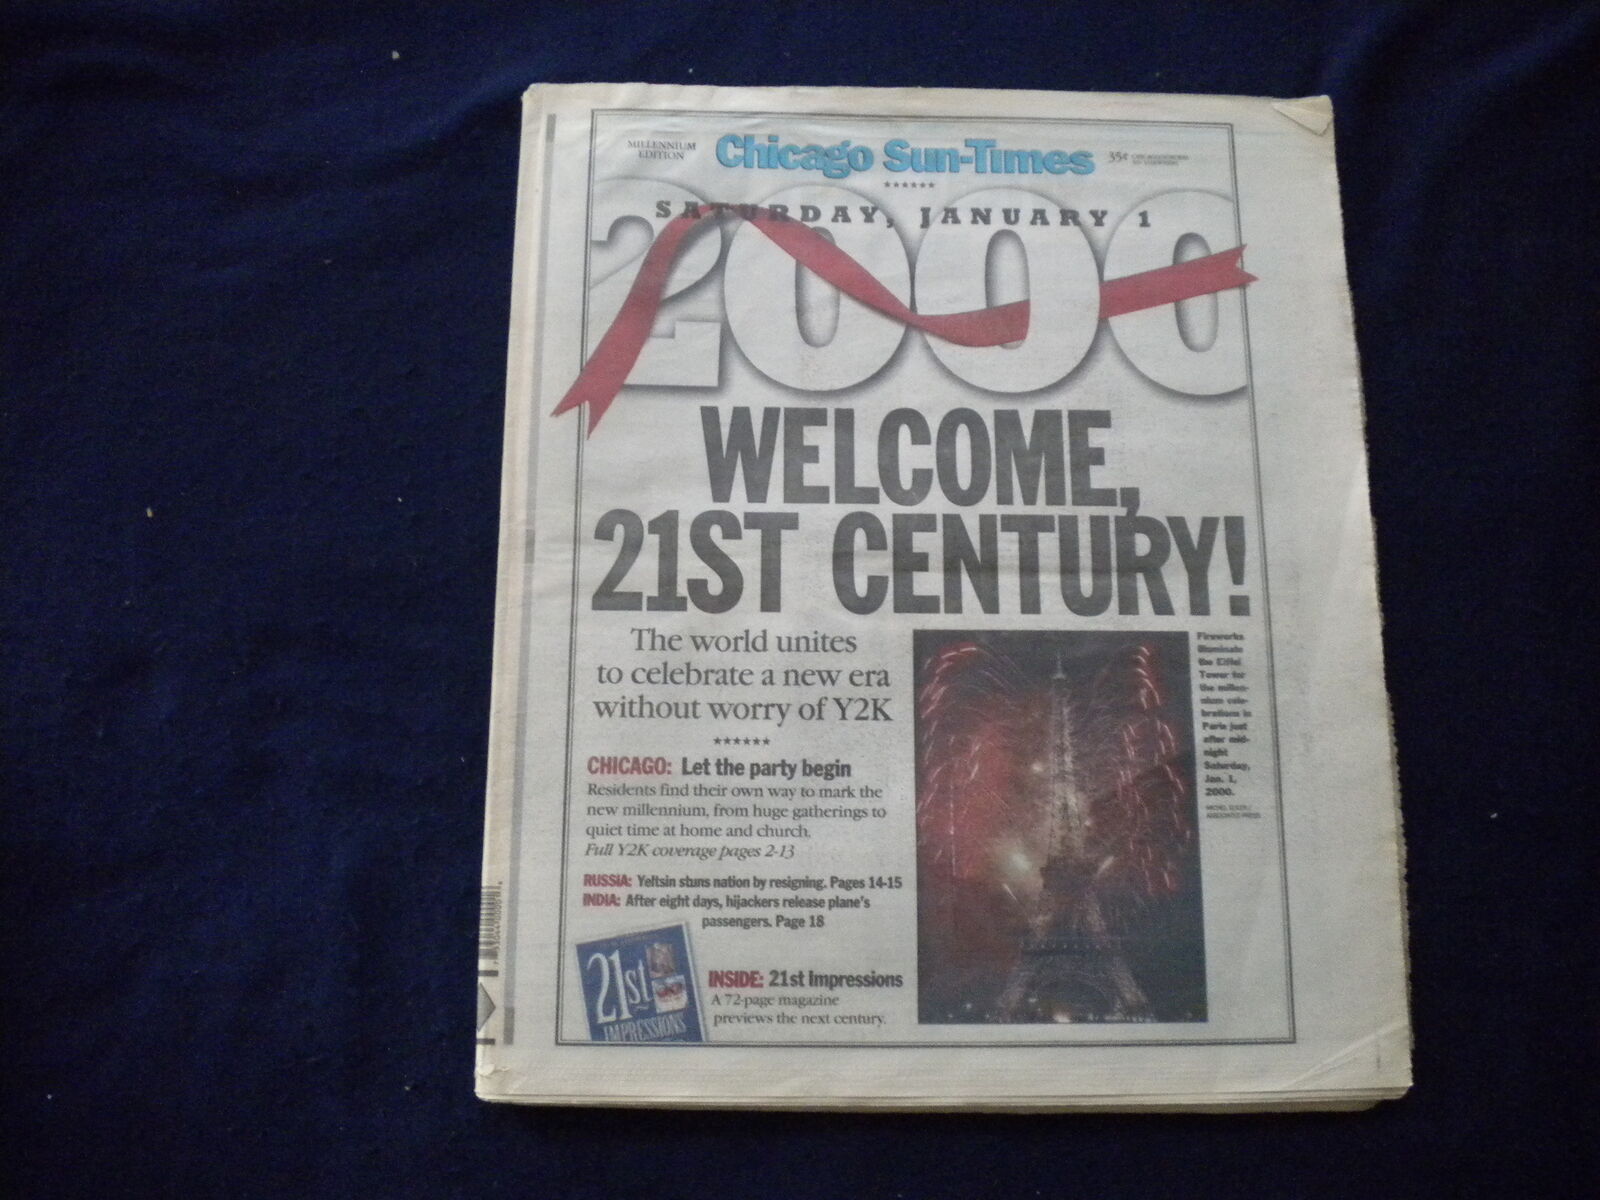 2000 JANUARY 1 CHICAGO SUN-TIMES NEWSPAPER - WELCOME, 21ST CENTURY - NP 5937